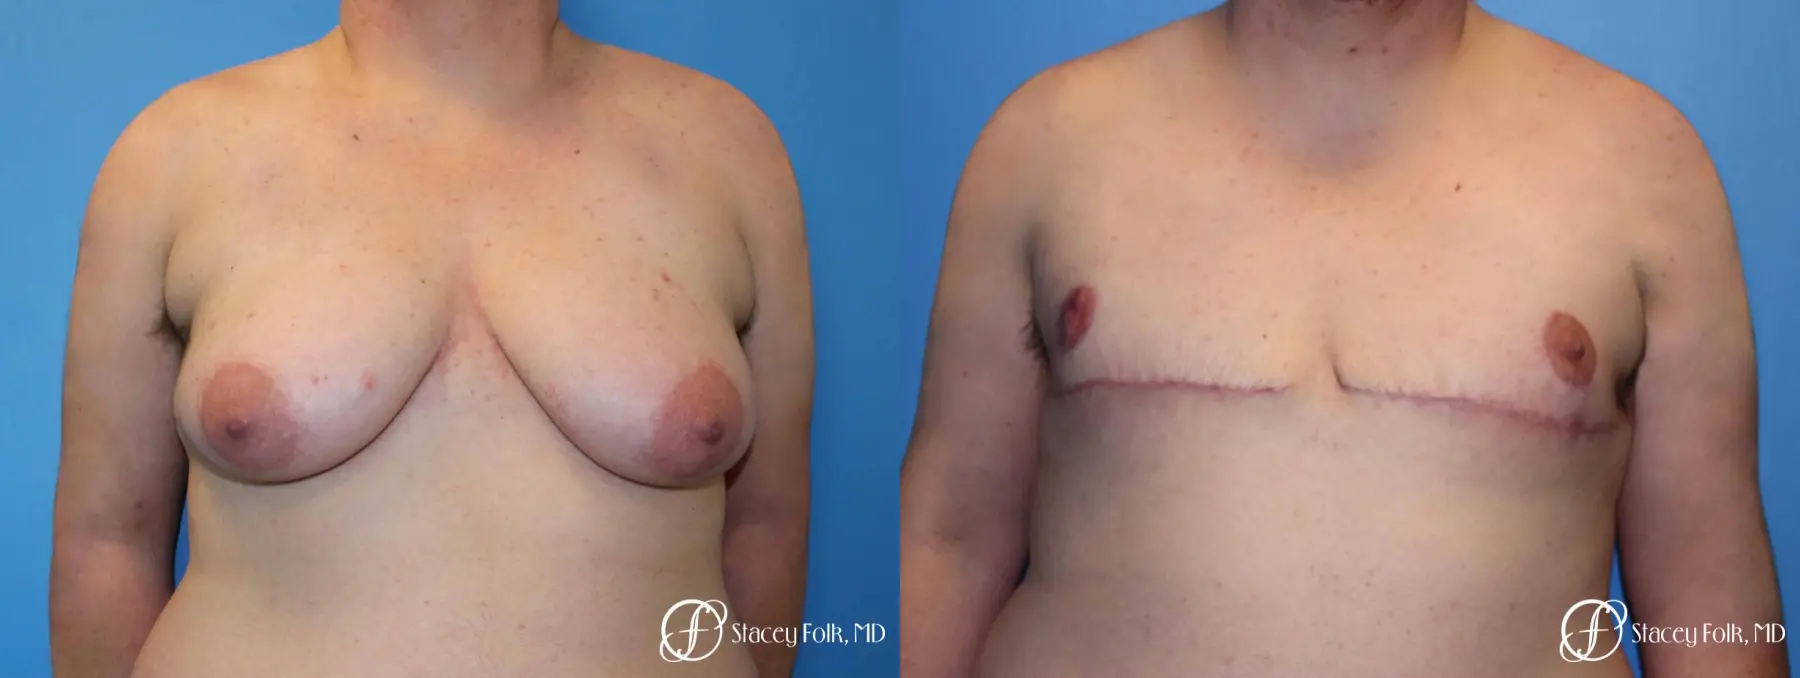 Denver FTM Female to male top surgery 5253 - Before and After